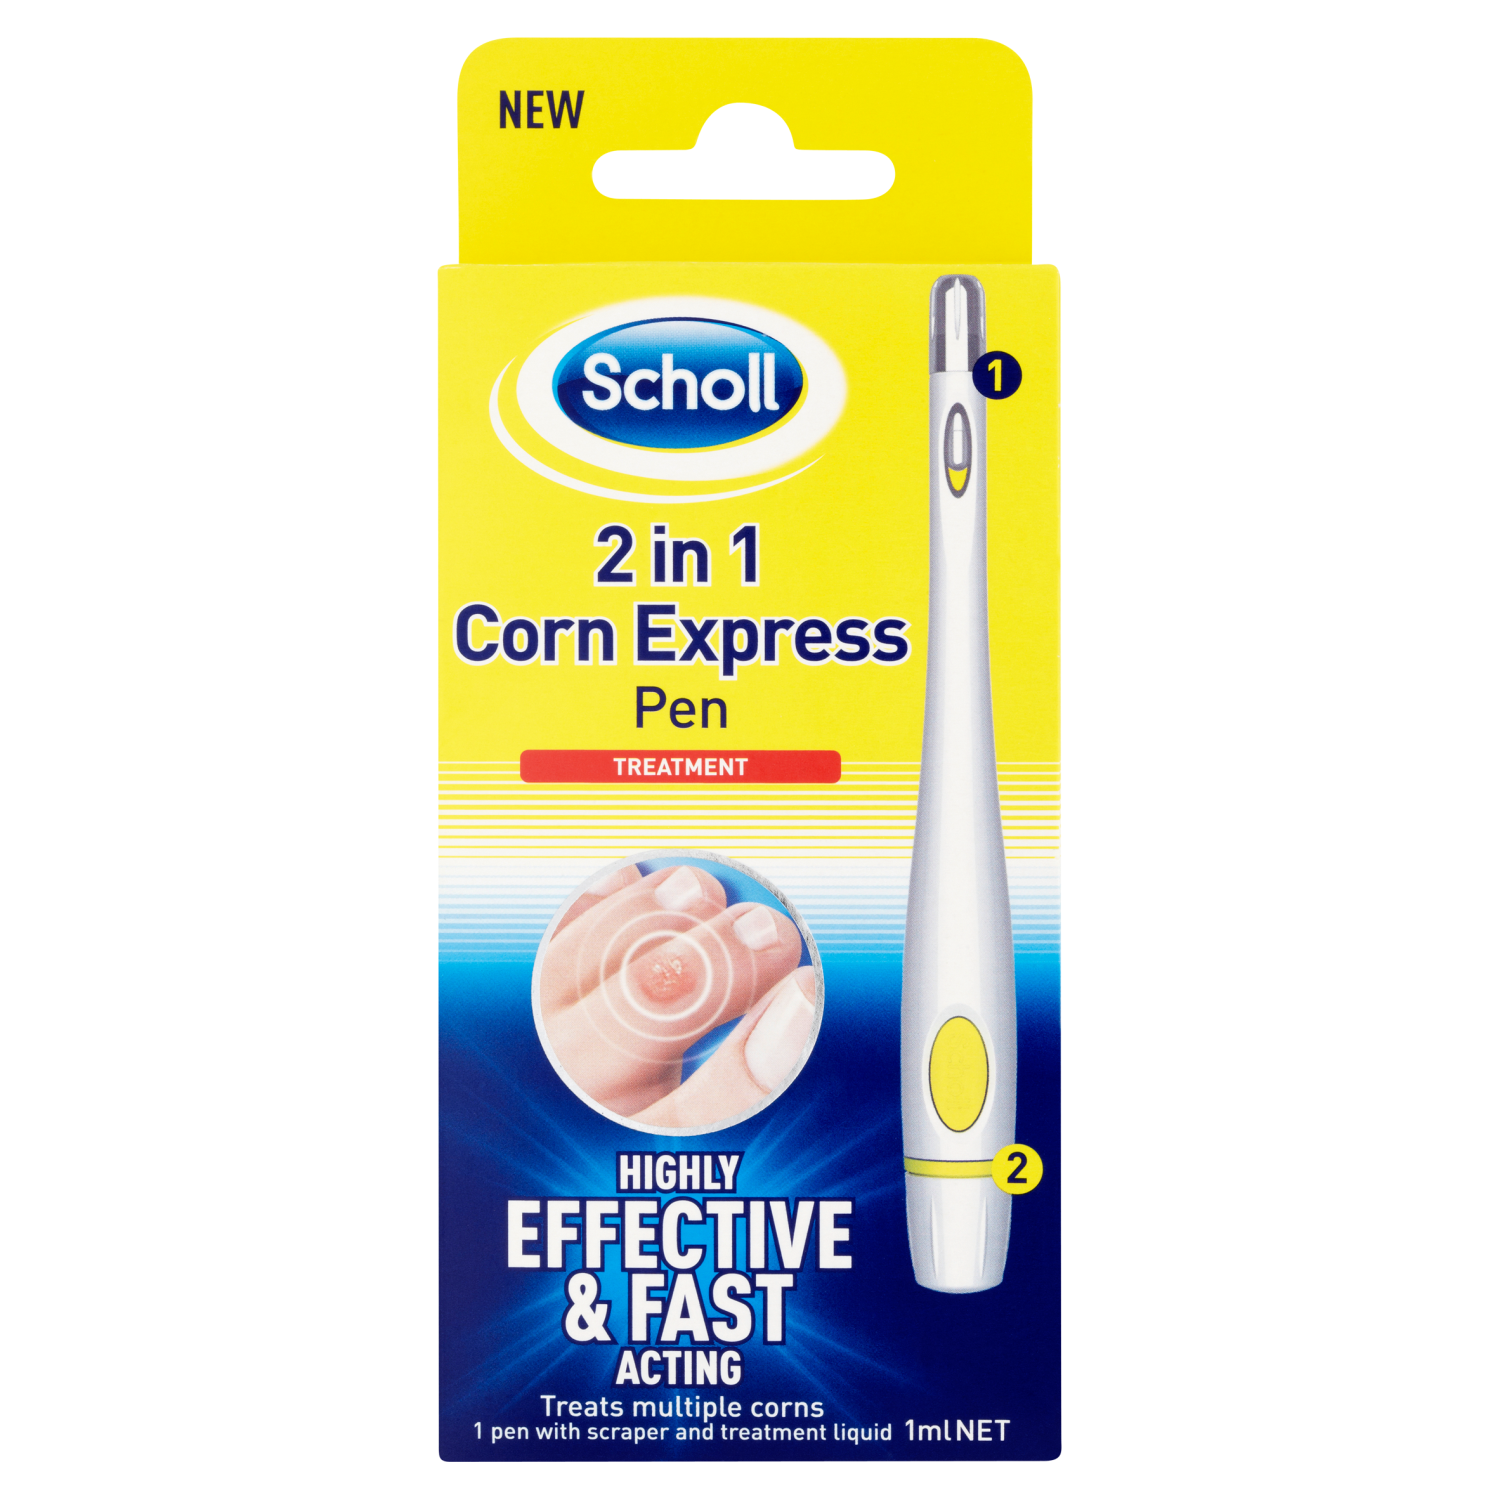 Calluses and corns on feet: corn treatment and pads - Scholl